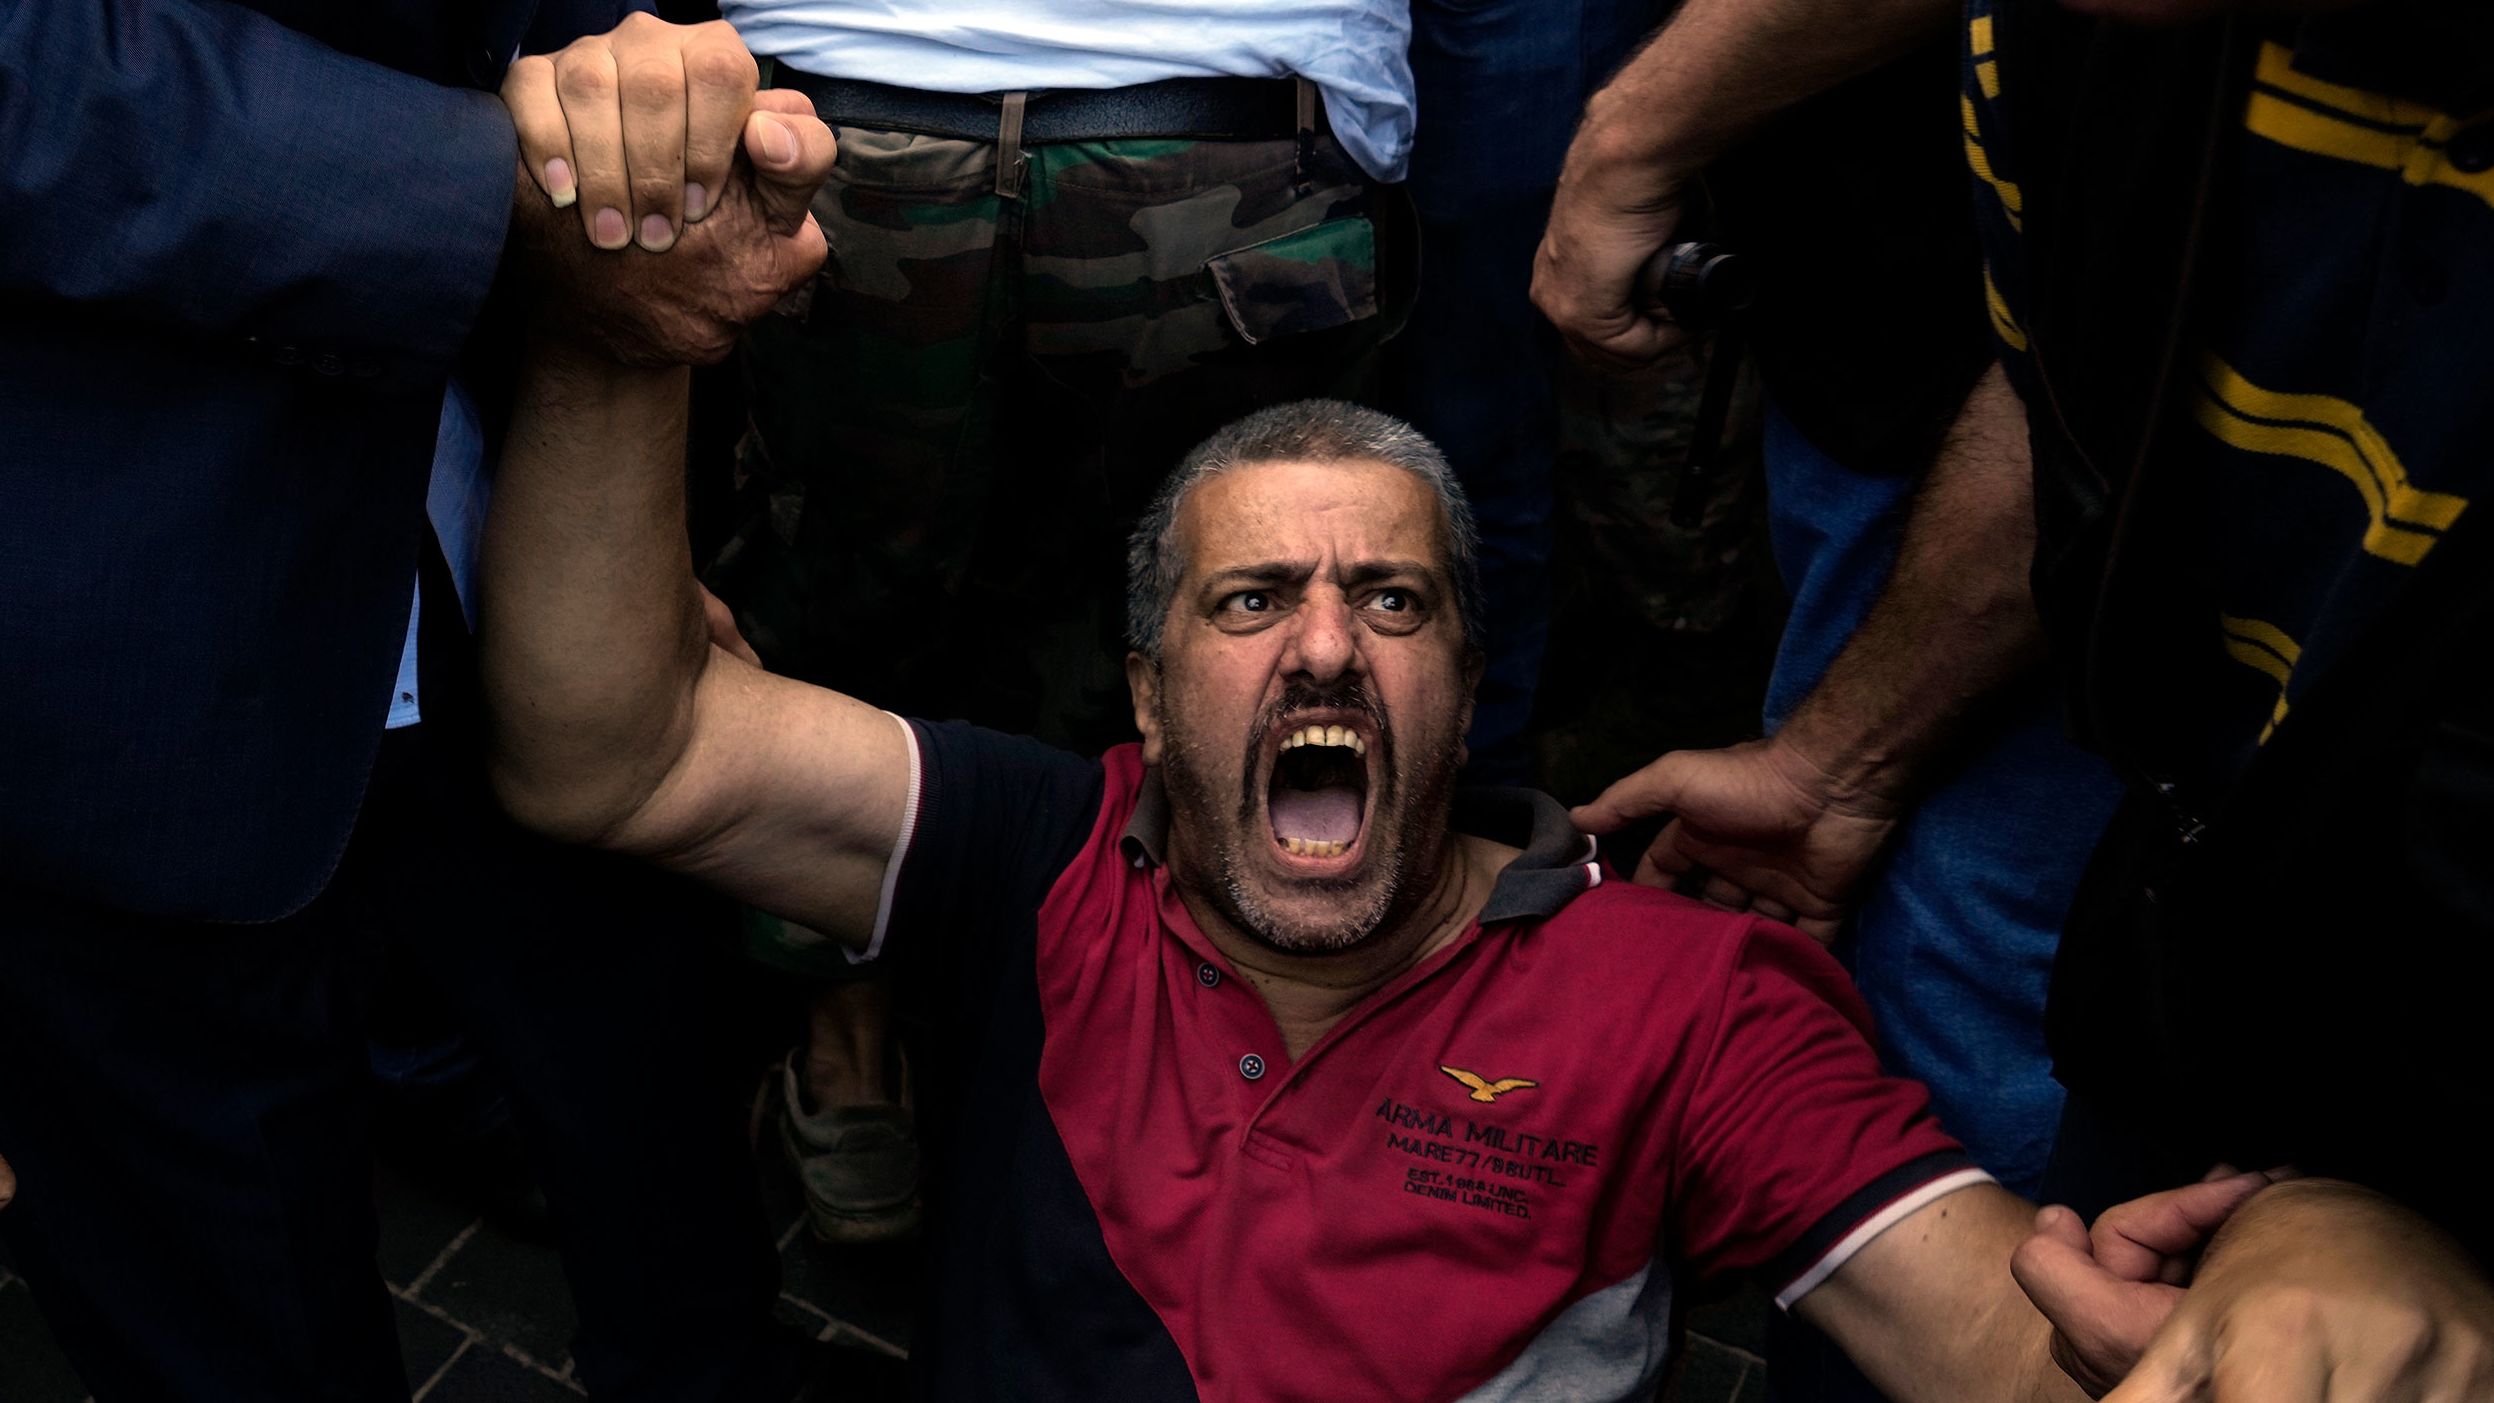 A retired army member lies on the ground and chants slogans as other protesters try to enter Lebanon's parliament building in Beirut on Monday, September 26. Protesters were demanding an increase in their monthly retirement pay, which has been affected by <a href="https://www.cnn.com/2022/09/22/asia/lebanon-banks-shut-holdups-intl/index.html" target="_blank">the country's financial crisis.</a>